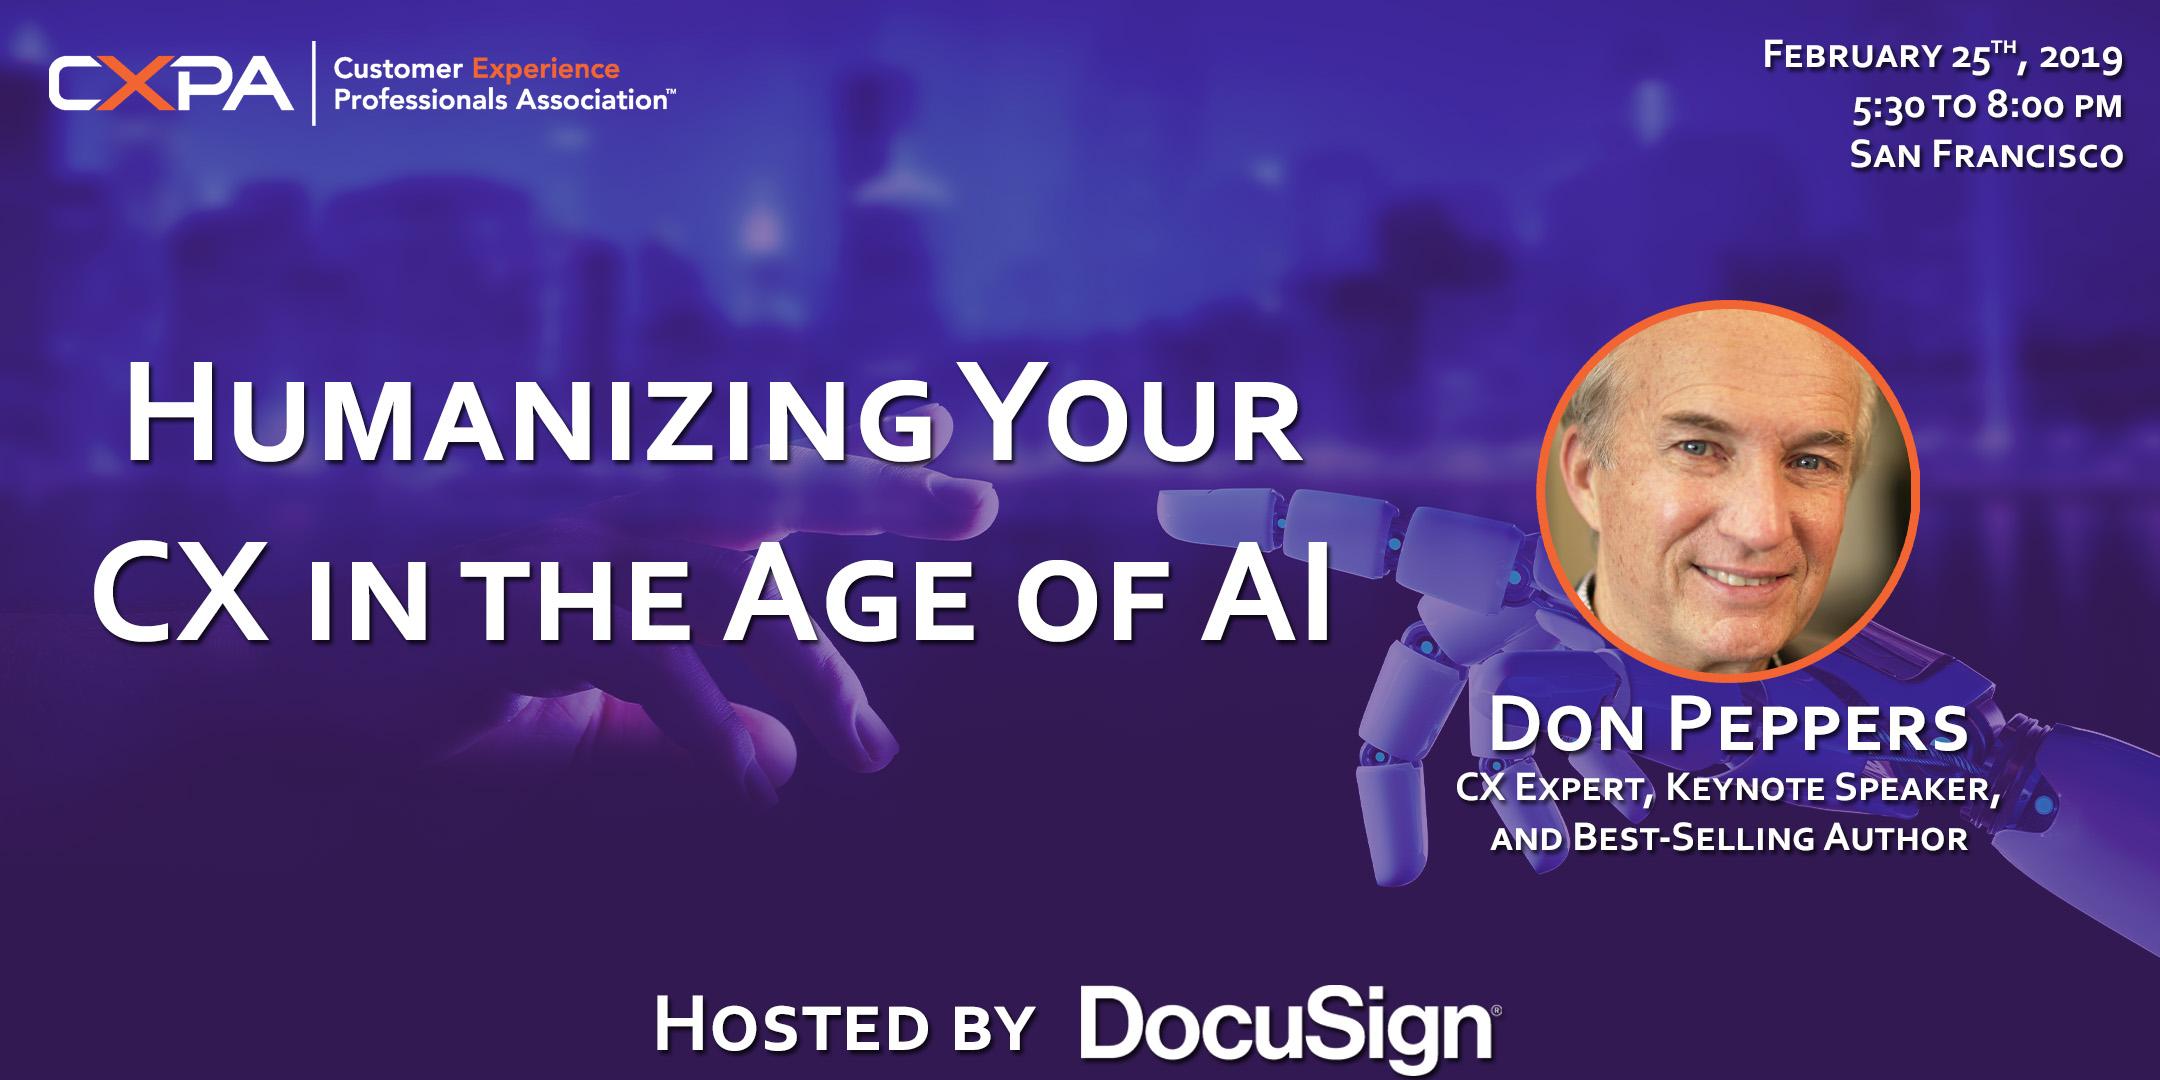 Humanizing Your CX in the Age of AI